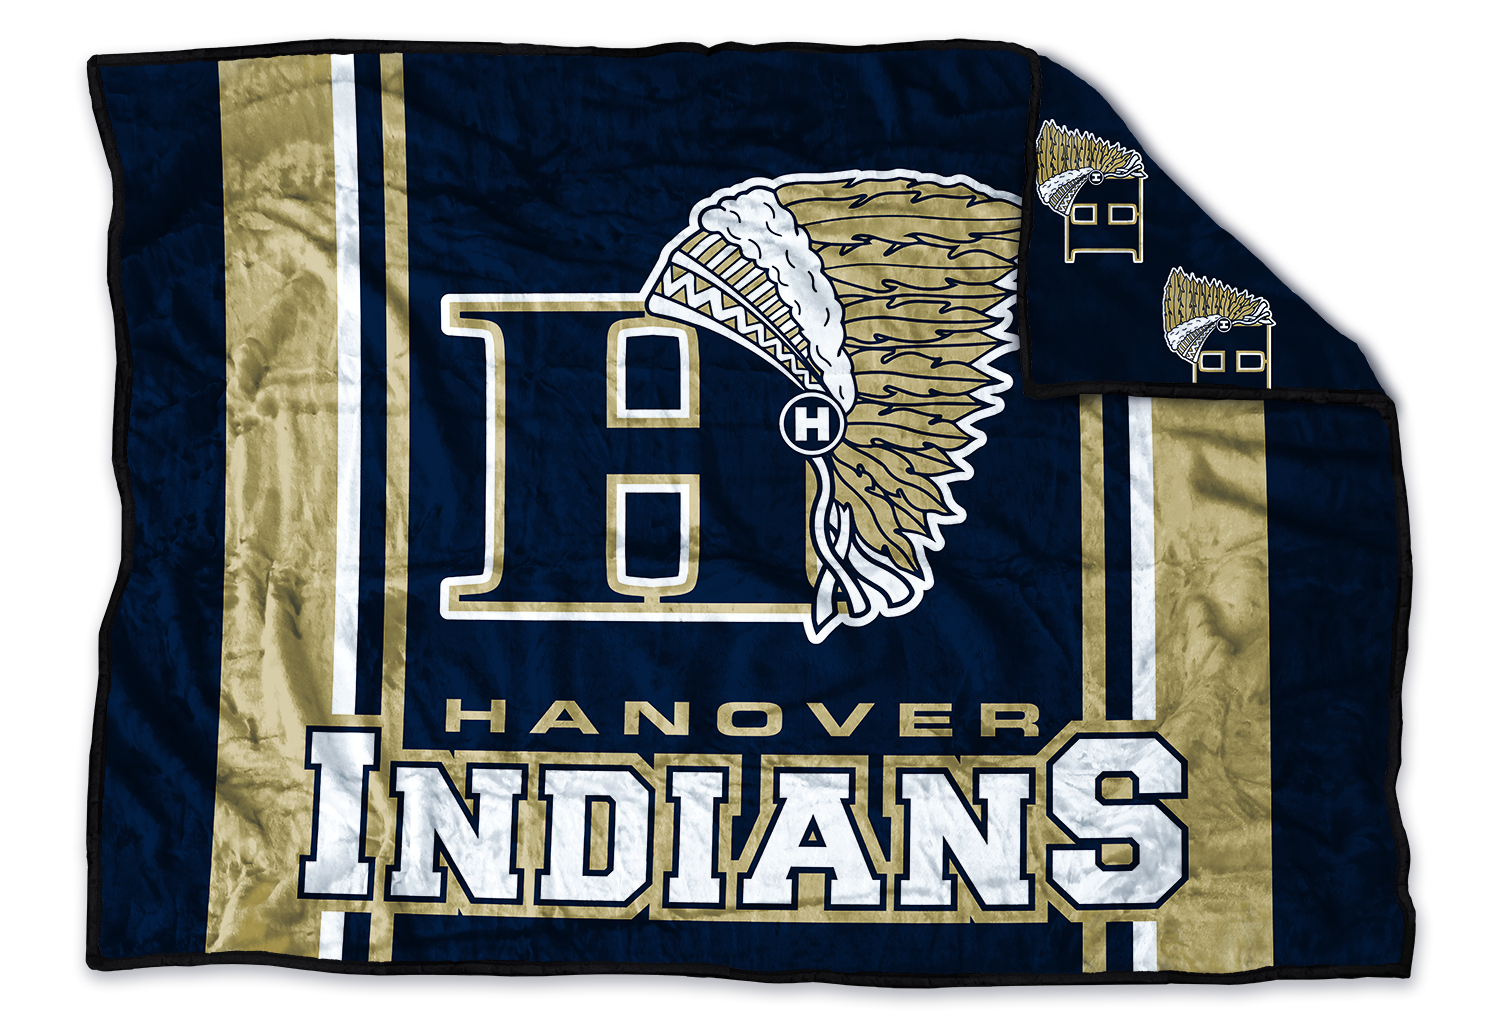 Hanover Indians